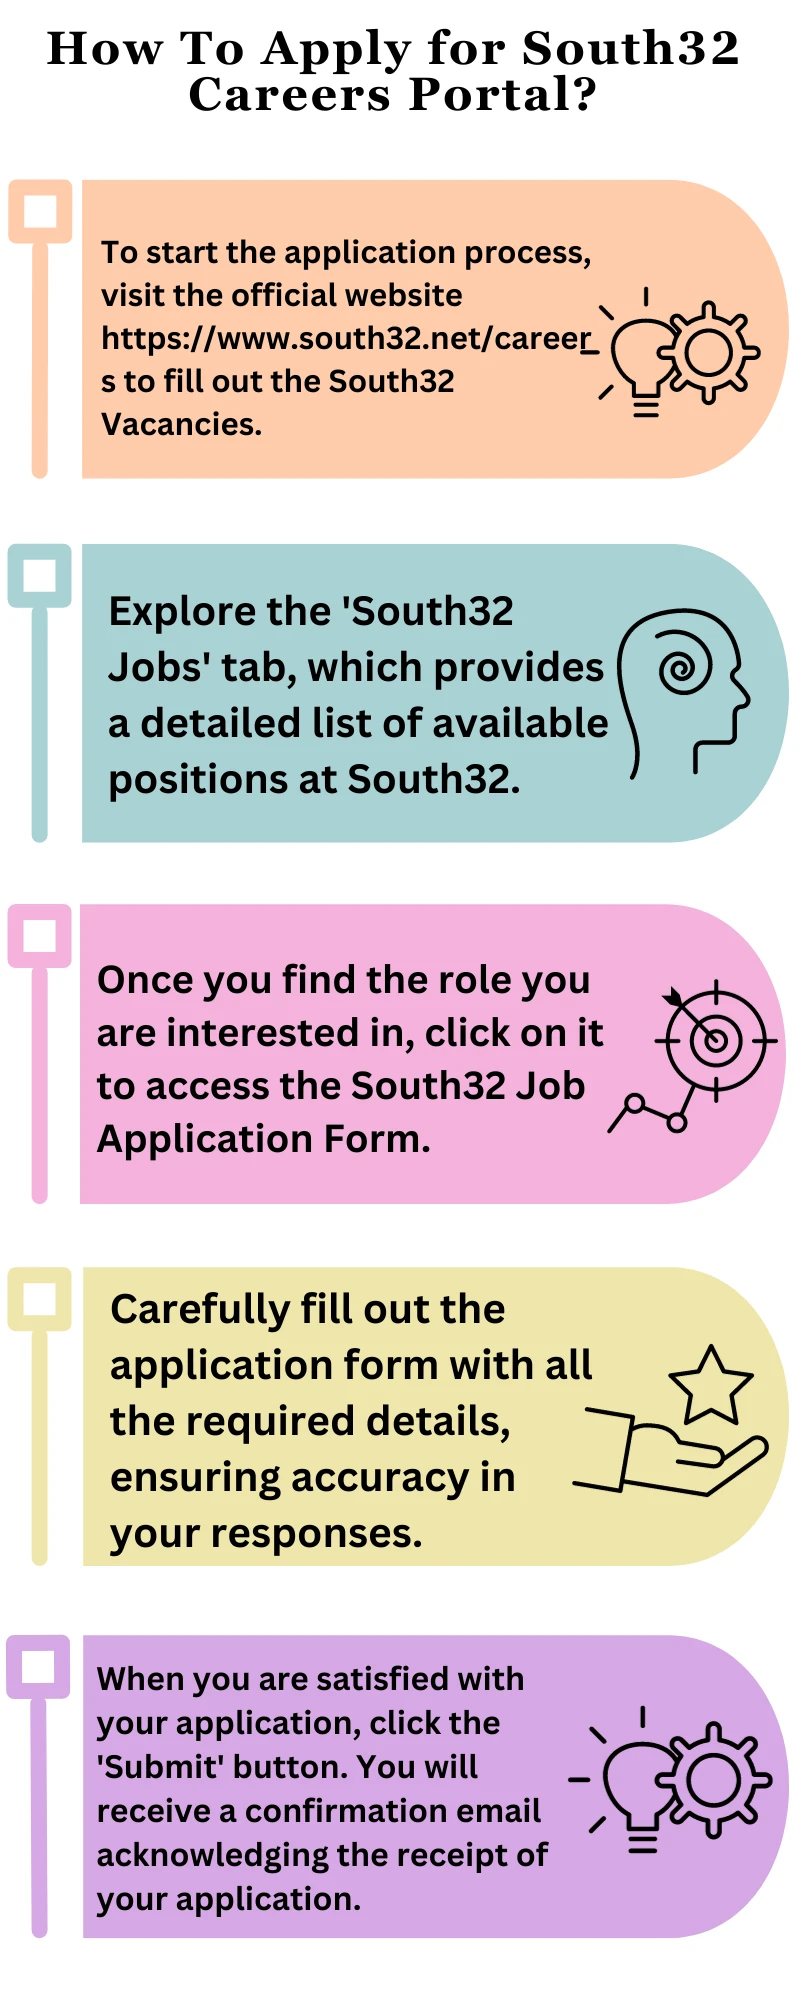 How To Apply for South32 Careers Portal?